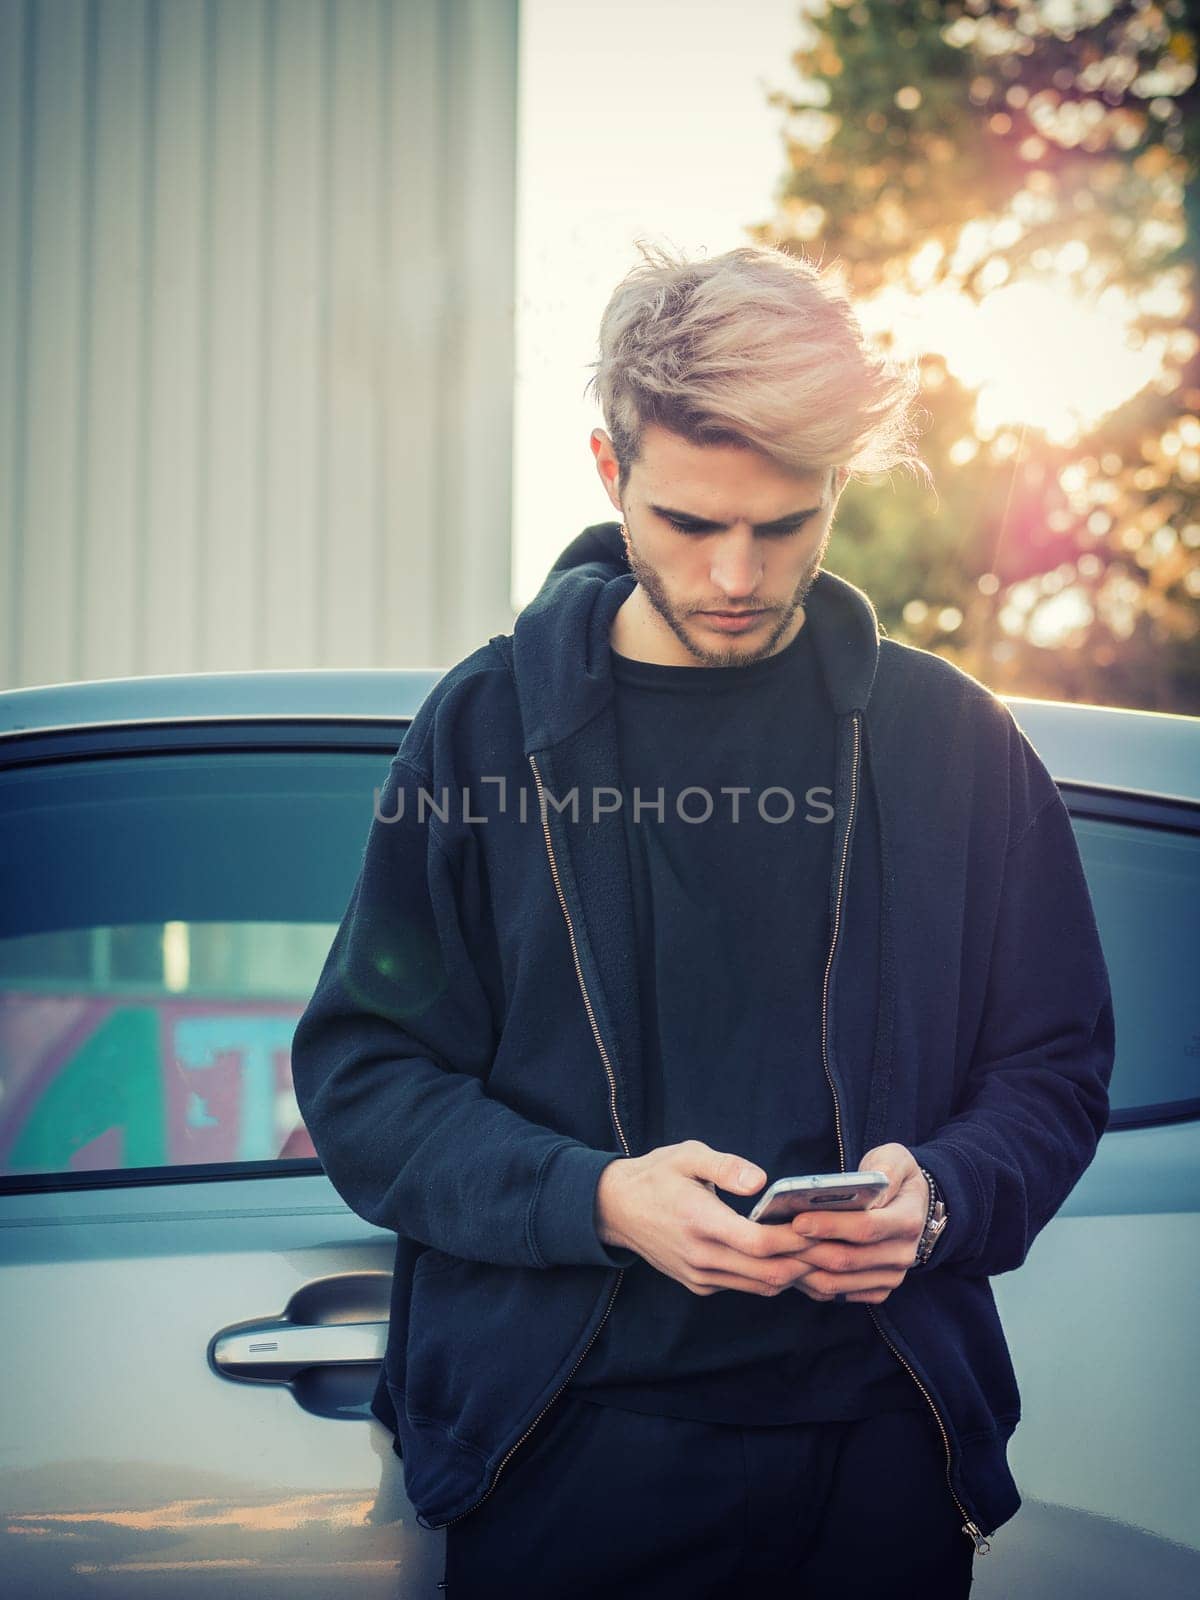 A man standing in front of a car looking at his cell phone. Photo of a man using his cell phone while standing in front of a car